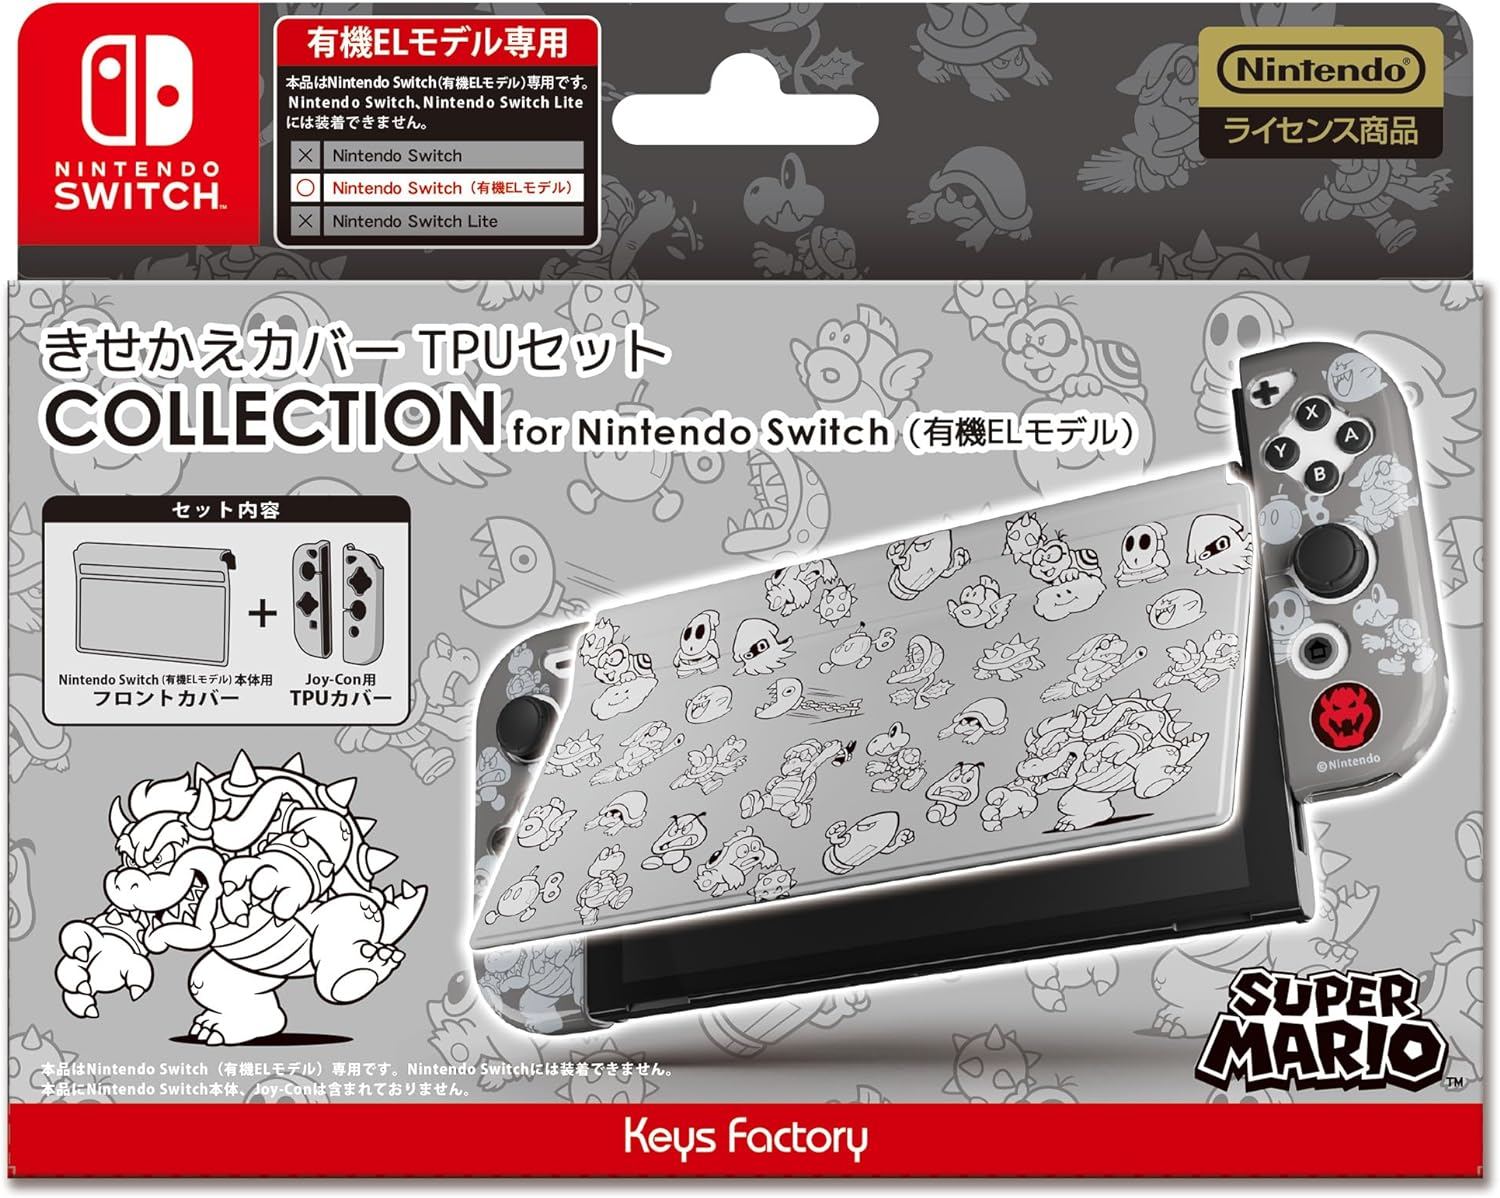 TPU Protector Set Collection for Nintendo Switch OLED Model (Super